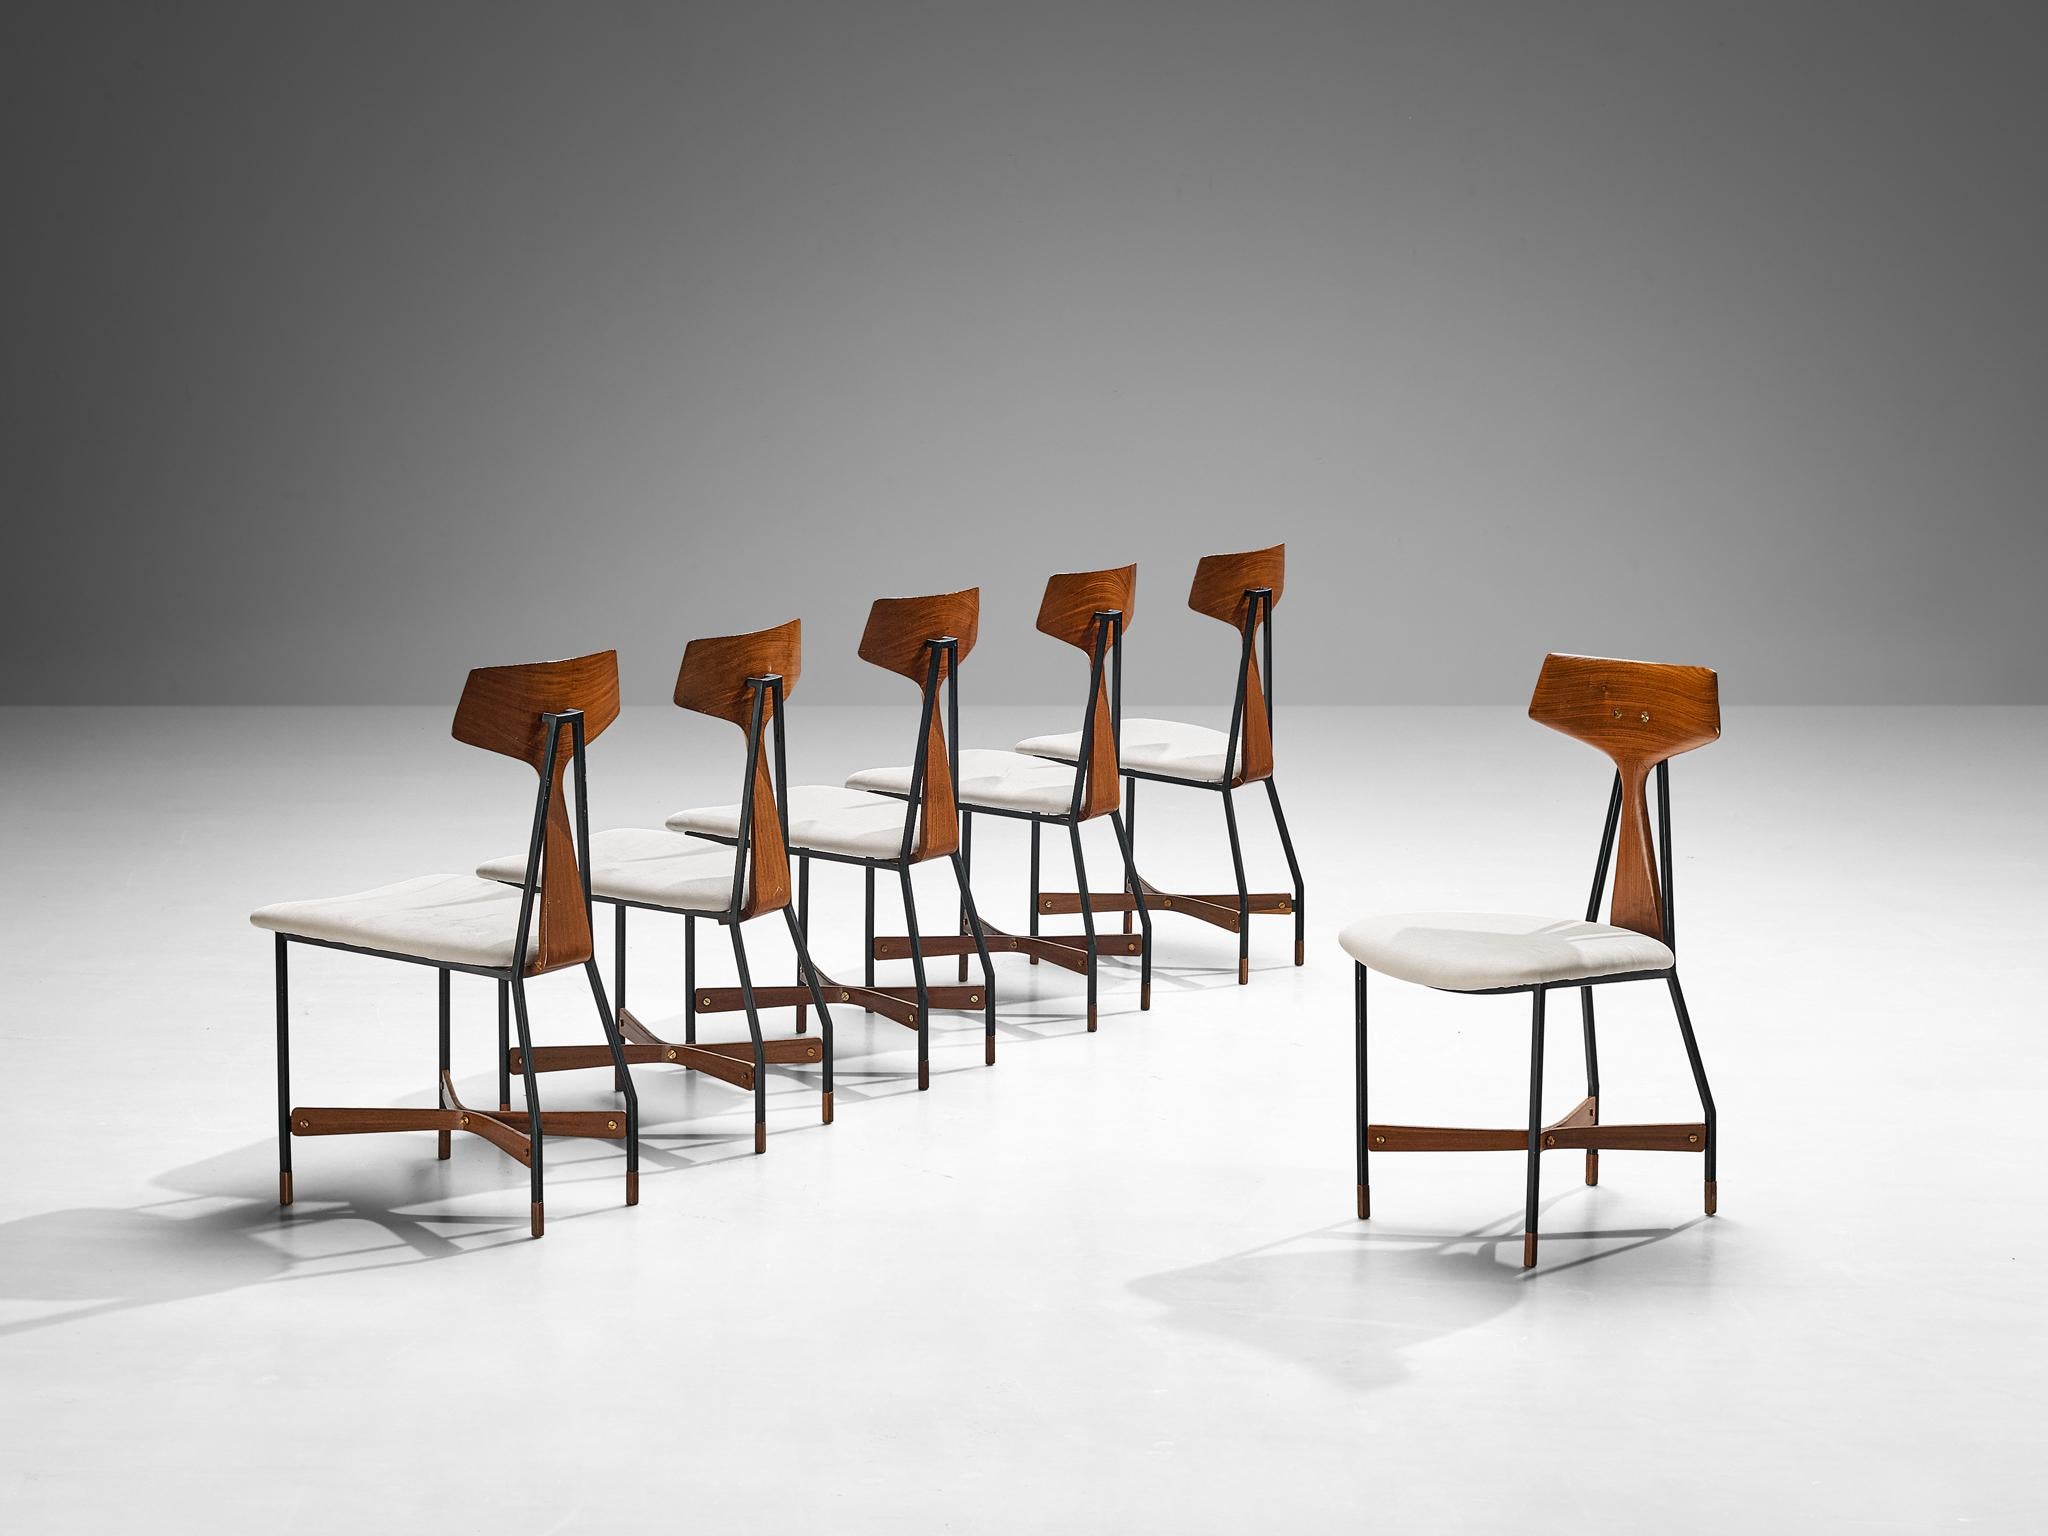 La Permanente Mobili Cantù set of six dining chairs, teak, black lacquered metal, alcantara, Italy, 1950s

Beautiful and elegant set of six Italian dining chairs by La Permanente Mobili Cantù. These delicate chairs are a treat for anyone loving